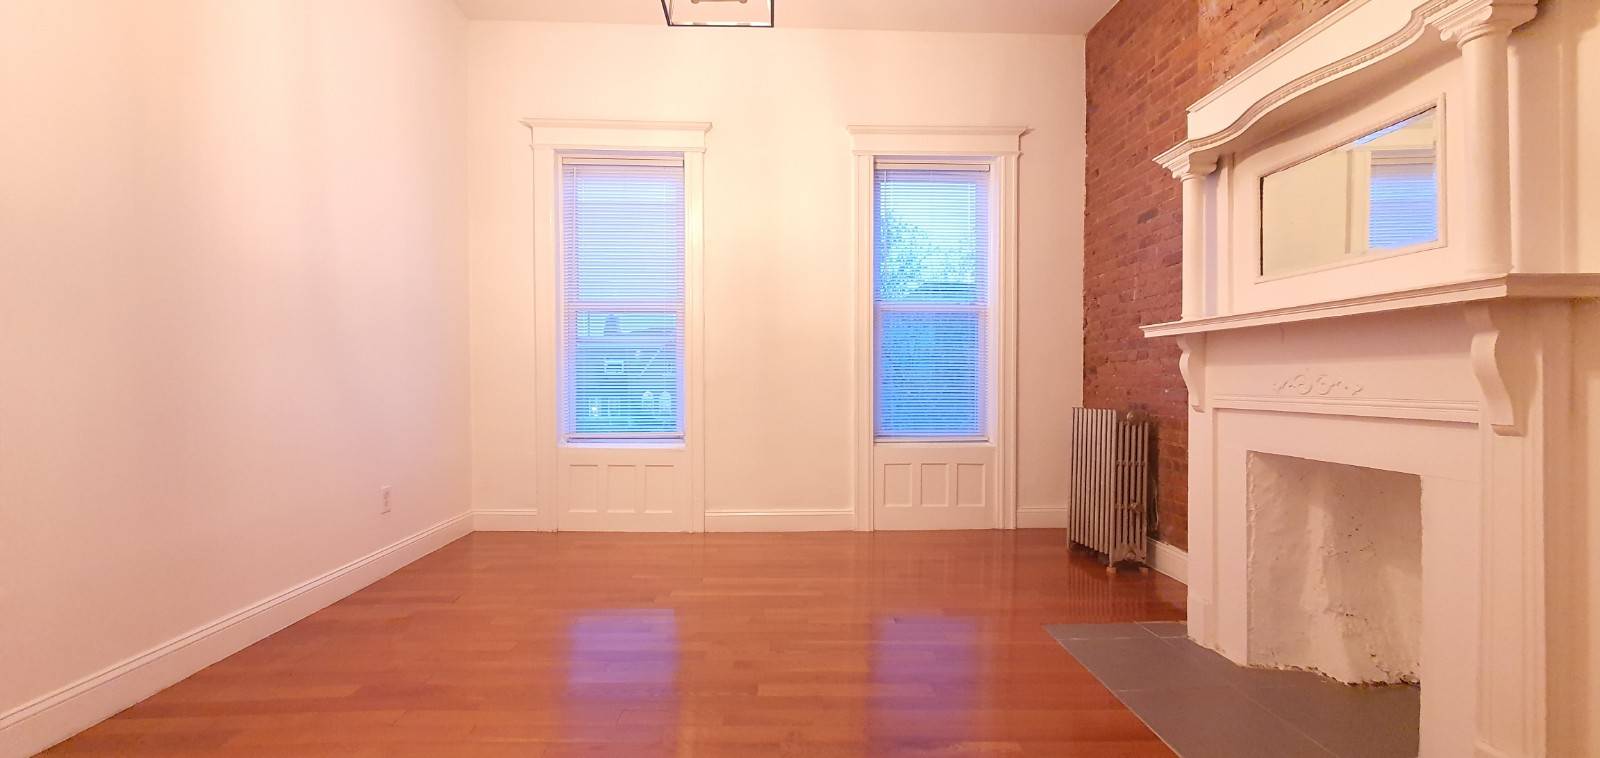 This large floor through 3 bedroom apartment in the center of Carroll Gardens should not be missed.